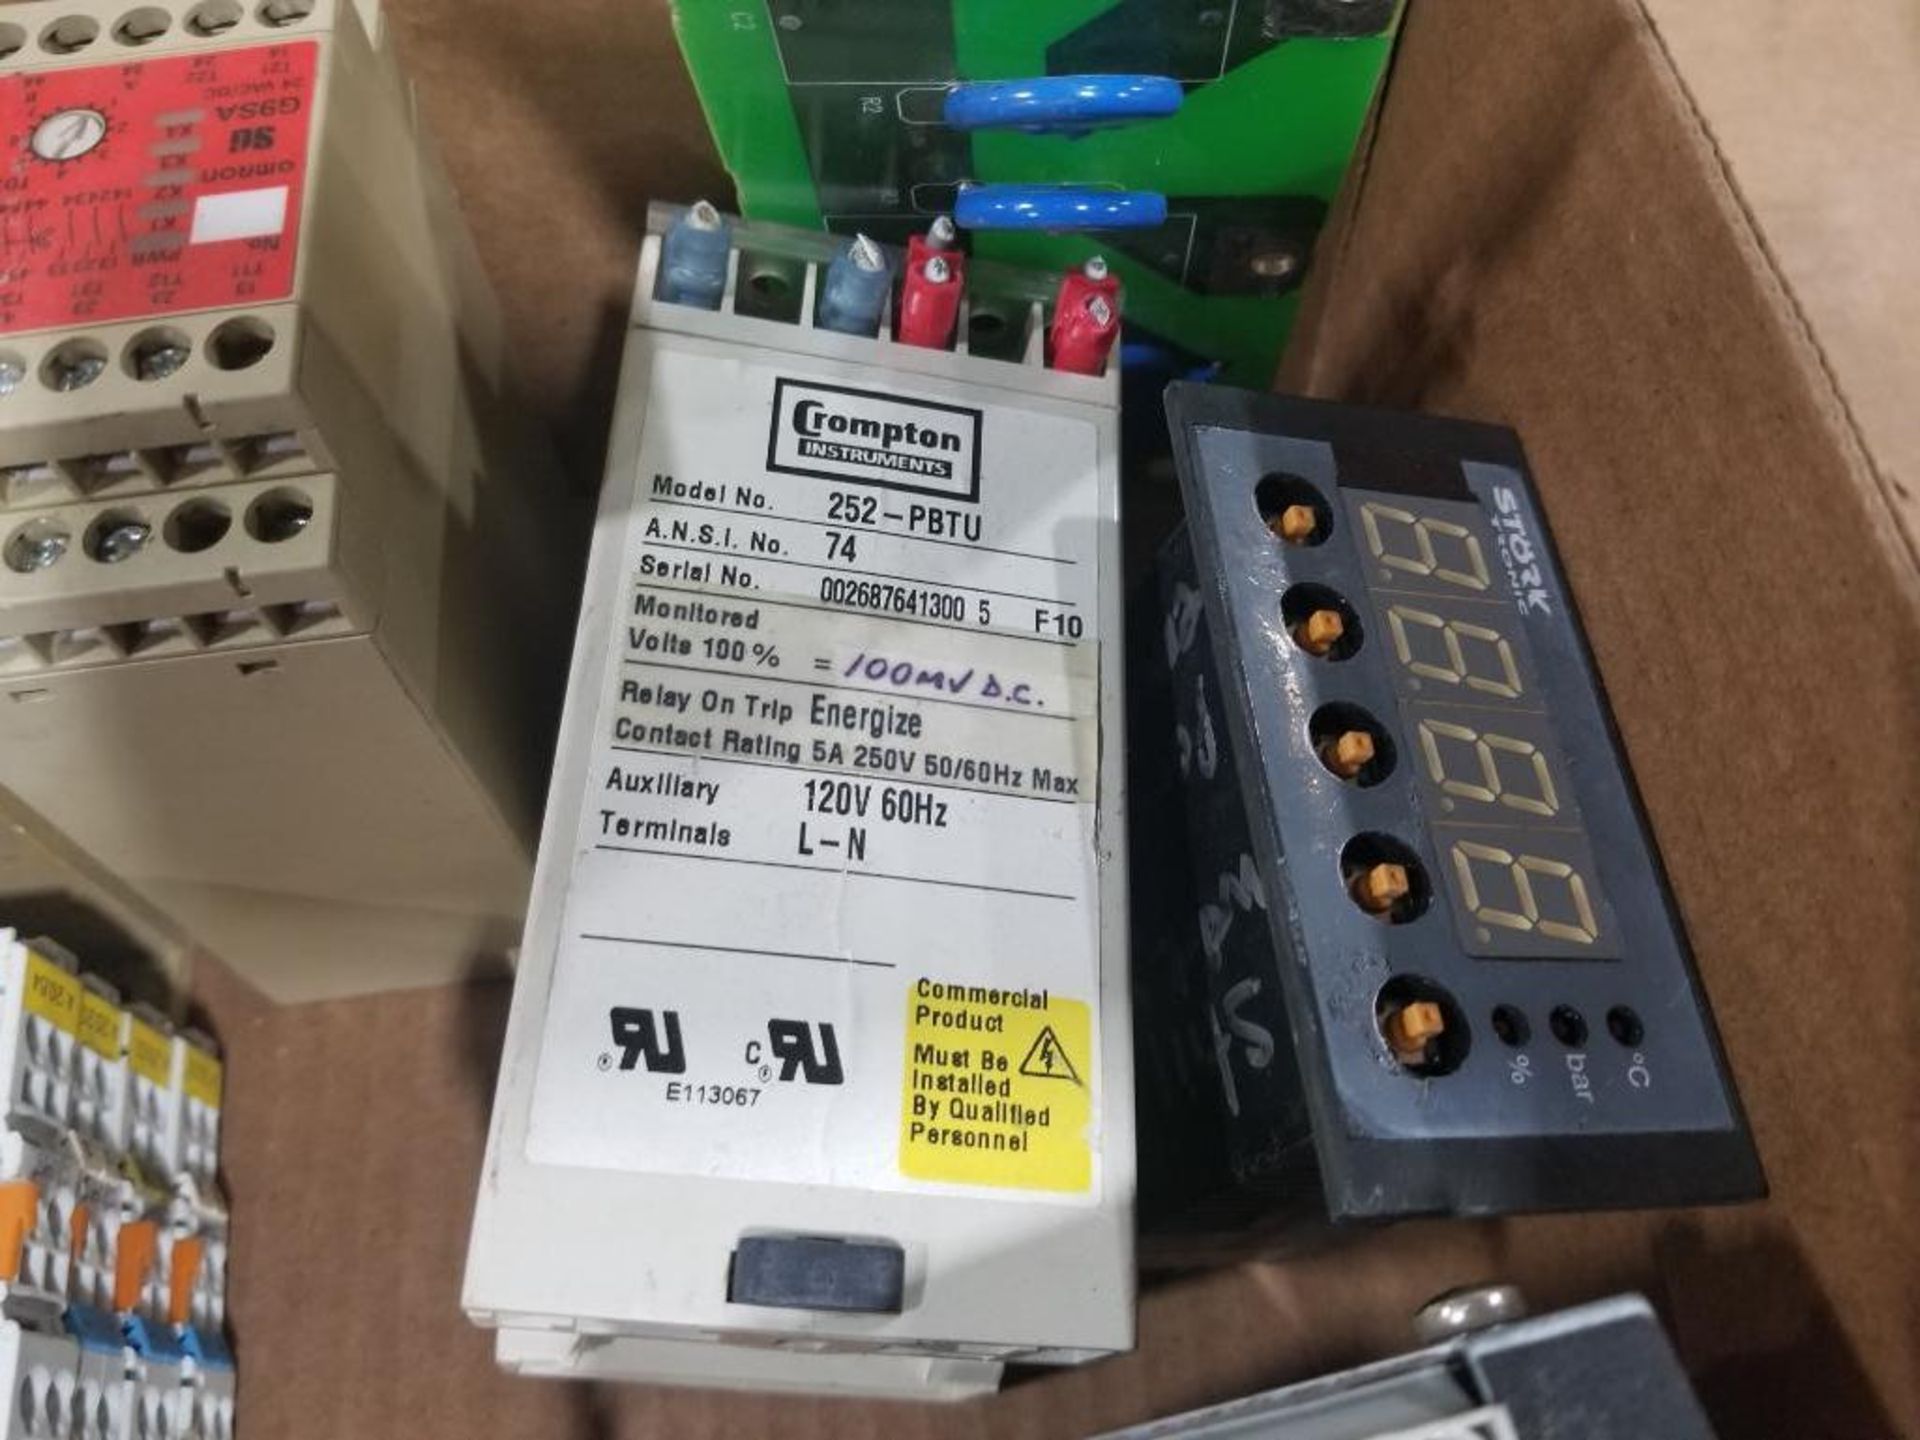 Assorted power supplies and electrical. - Image 4 of 9